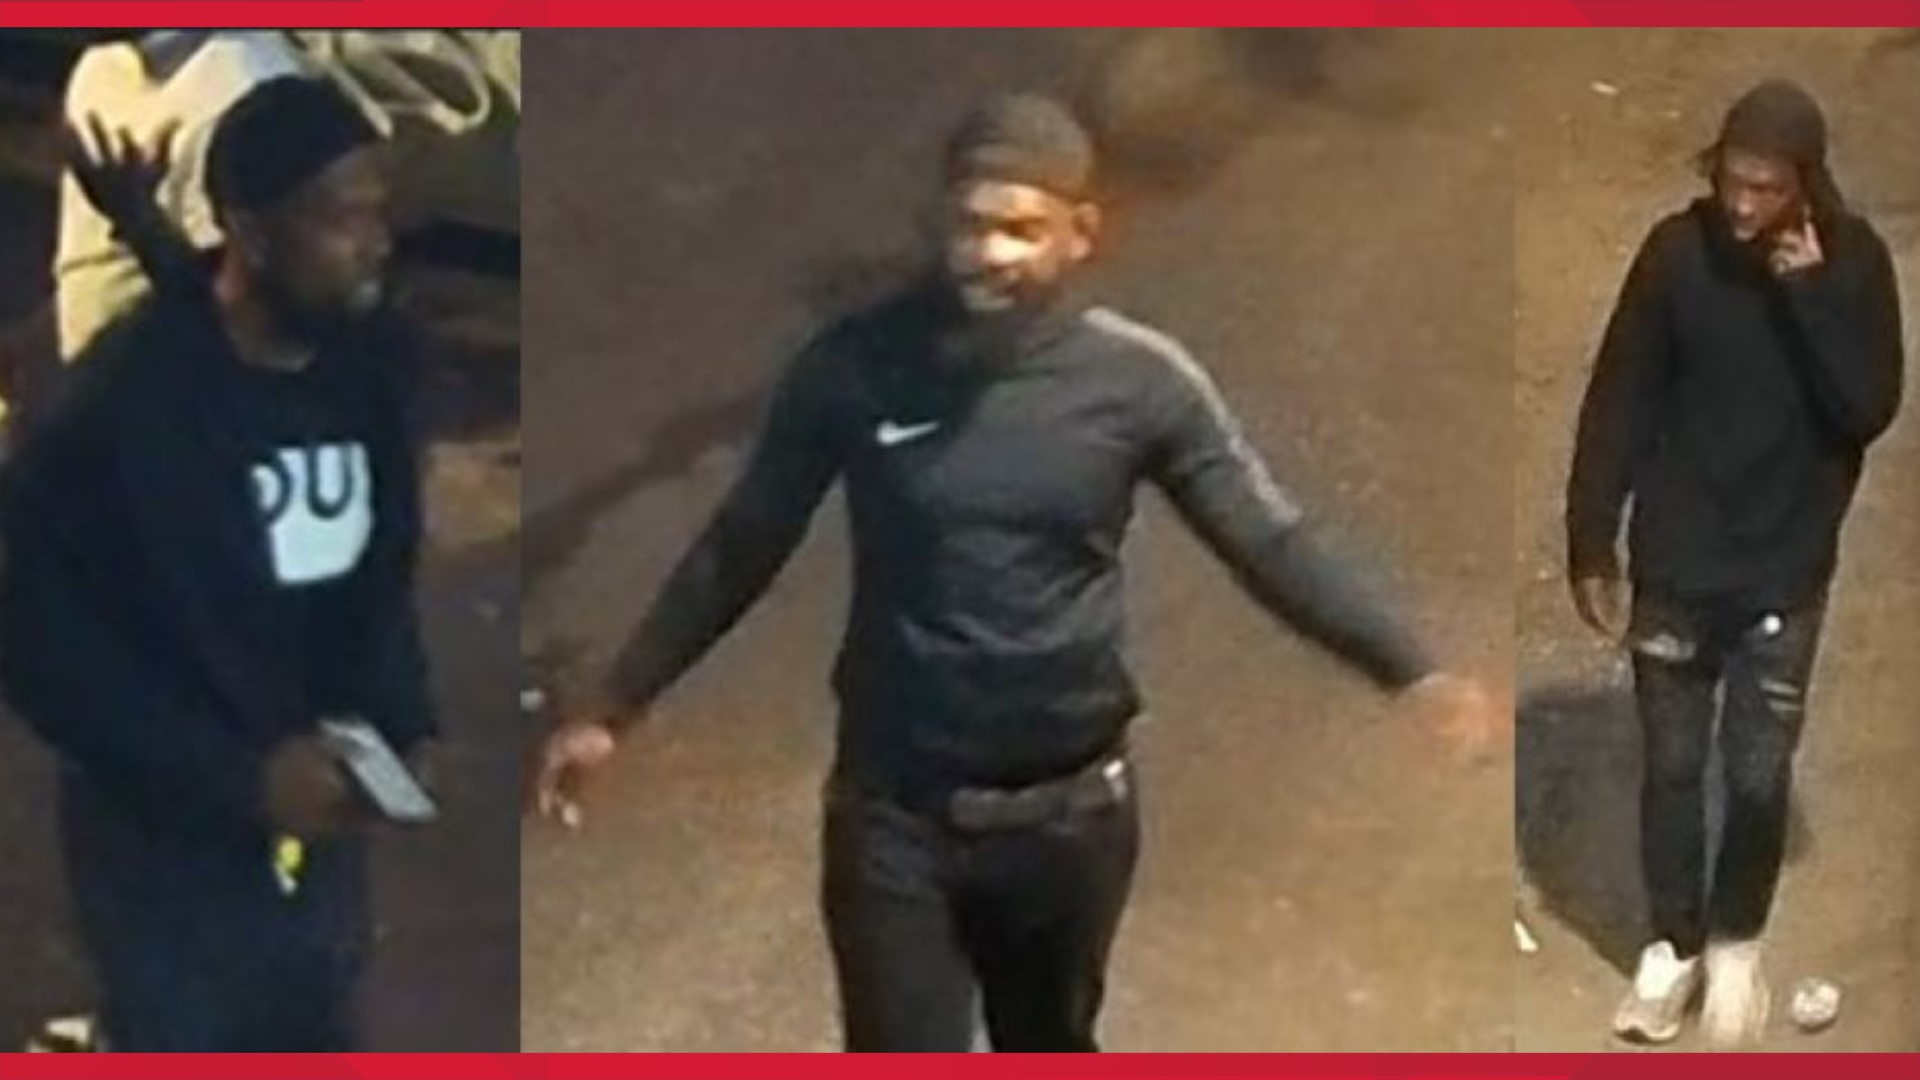 Armed robbery suspects wanted in Silver Spring | wusa9.com